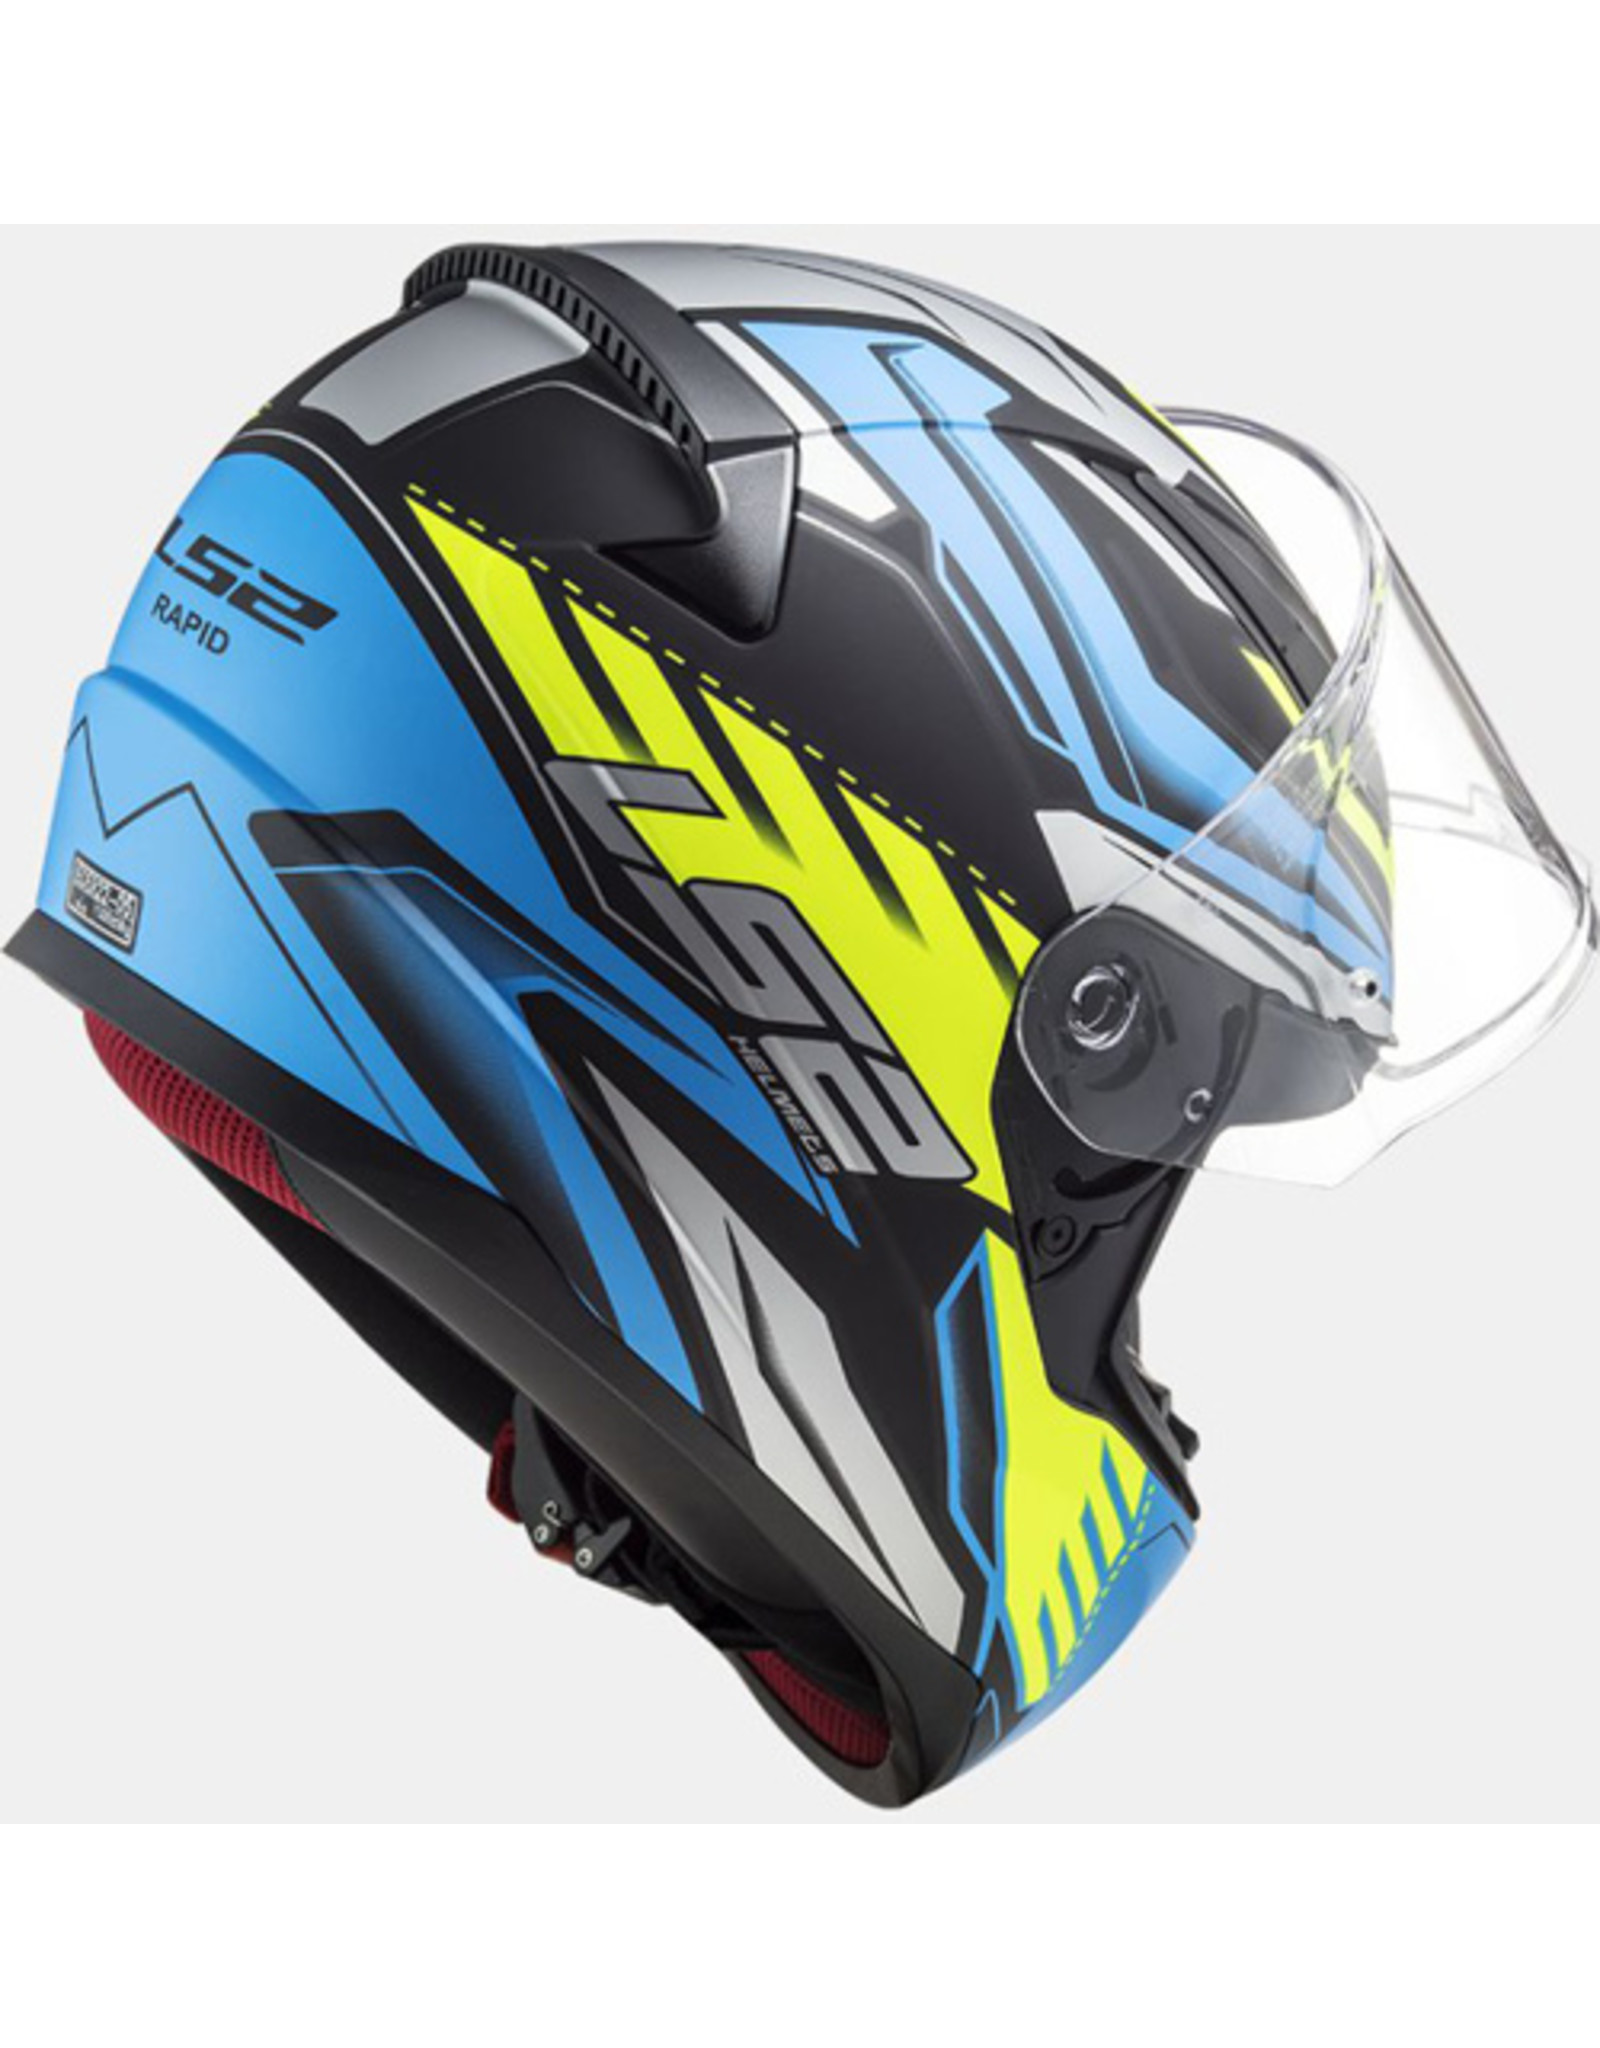 LS2 LS2 FF353 Gale Black / blue / fluo yellow